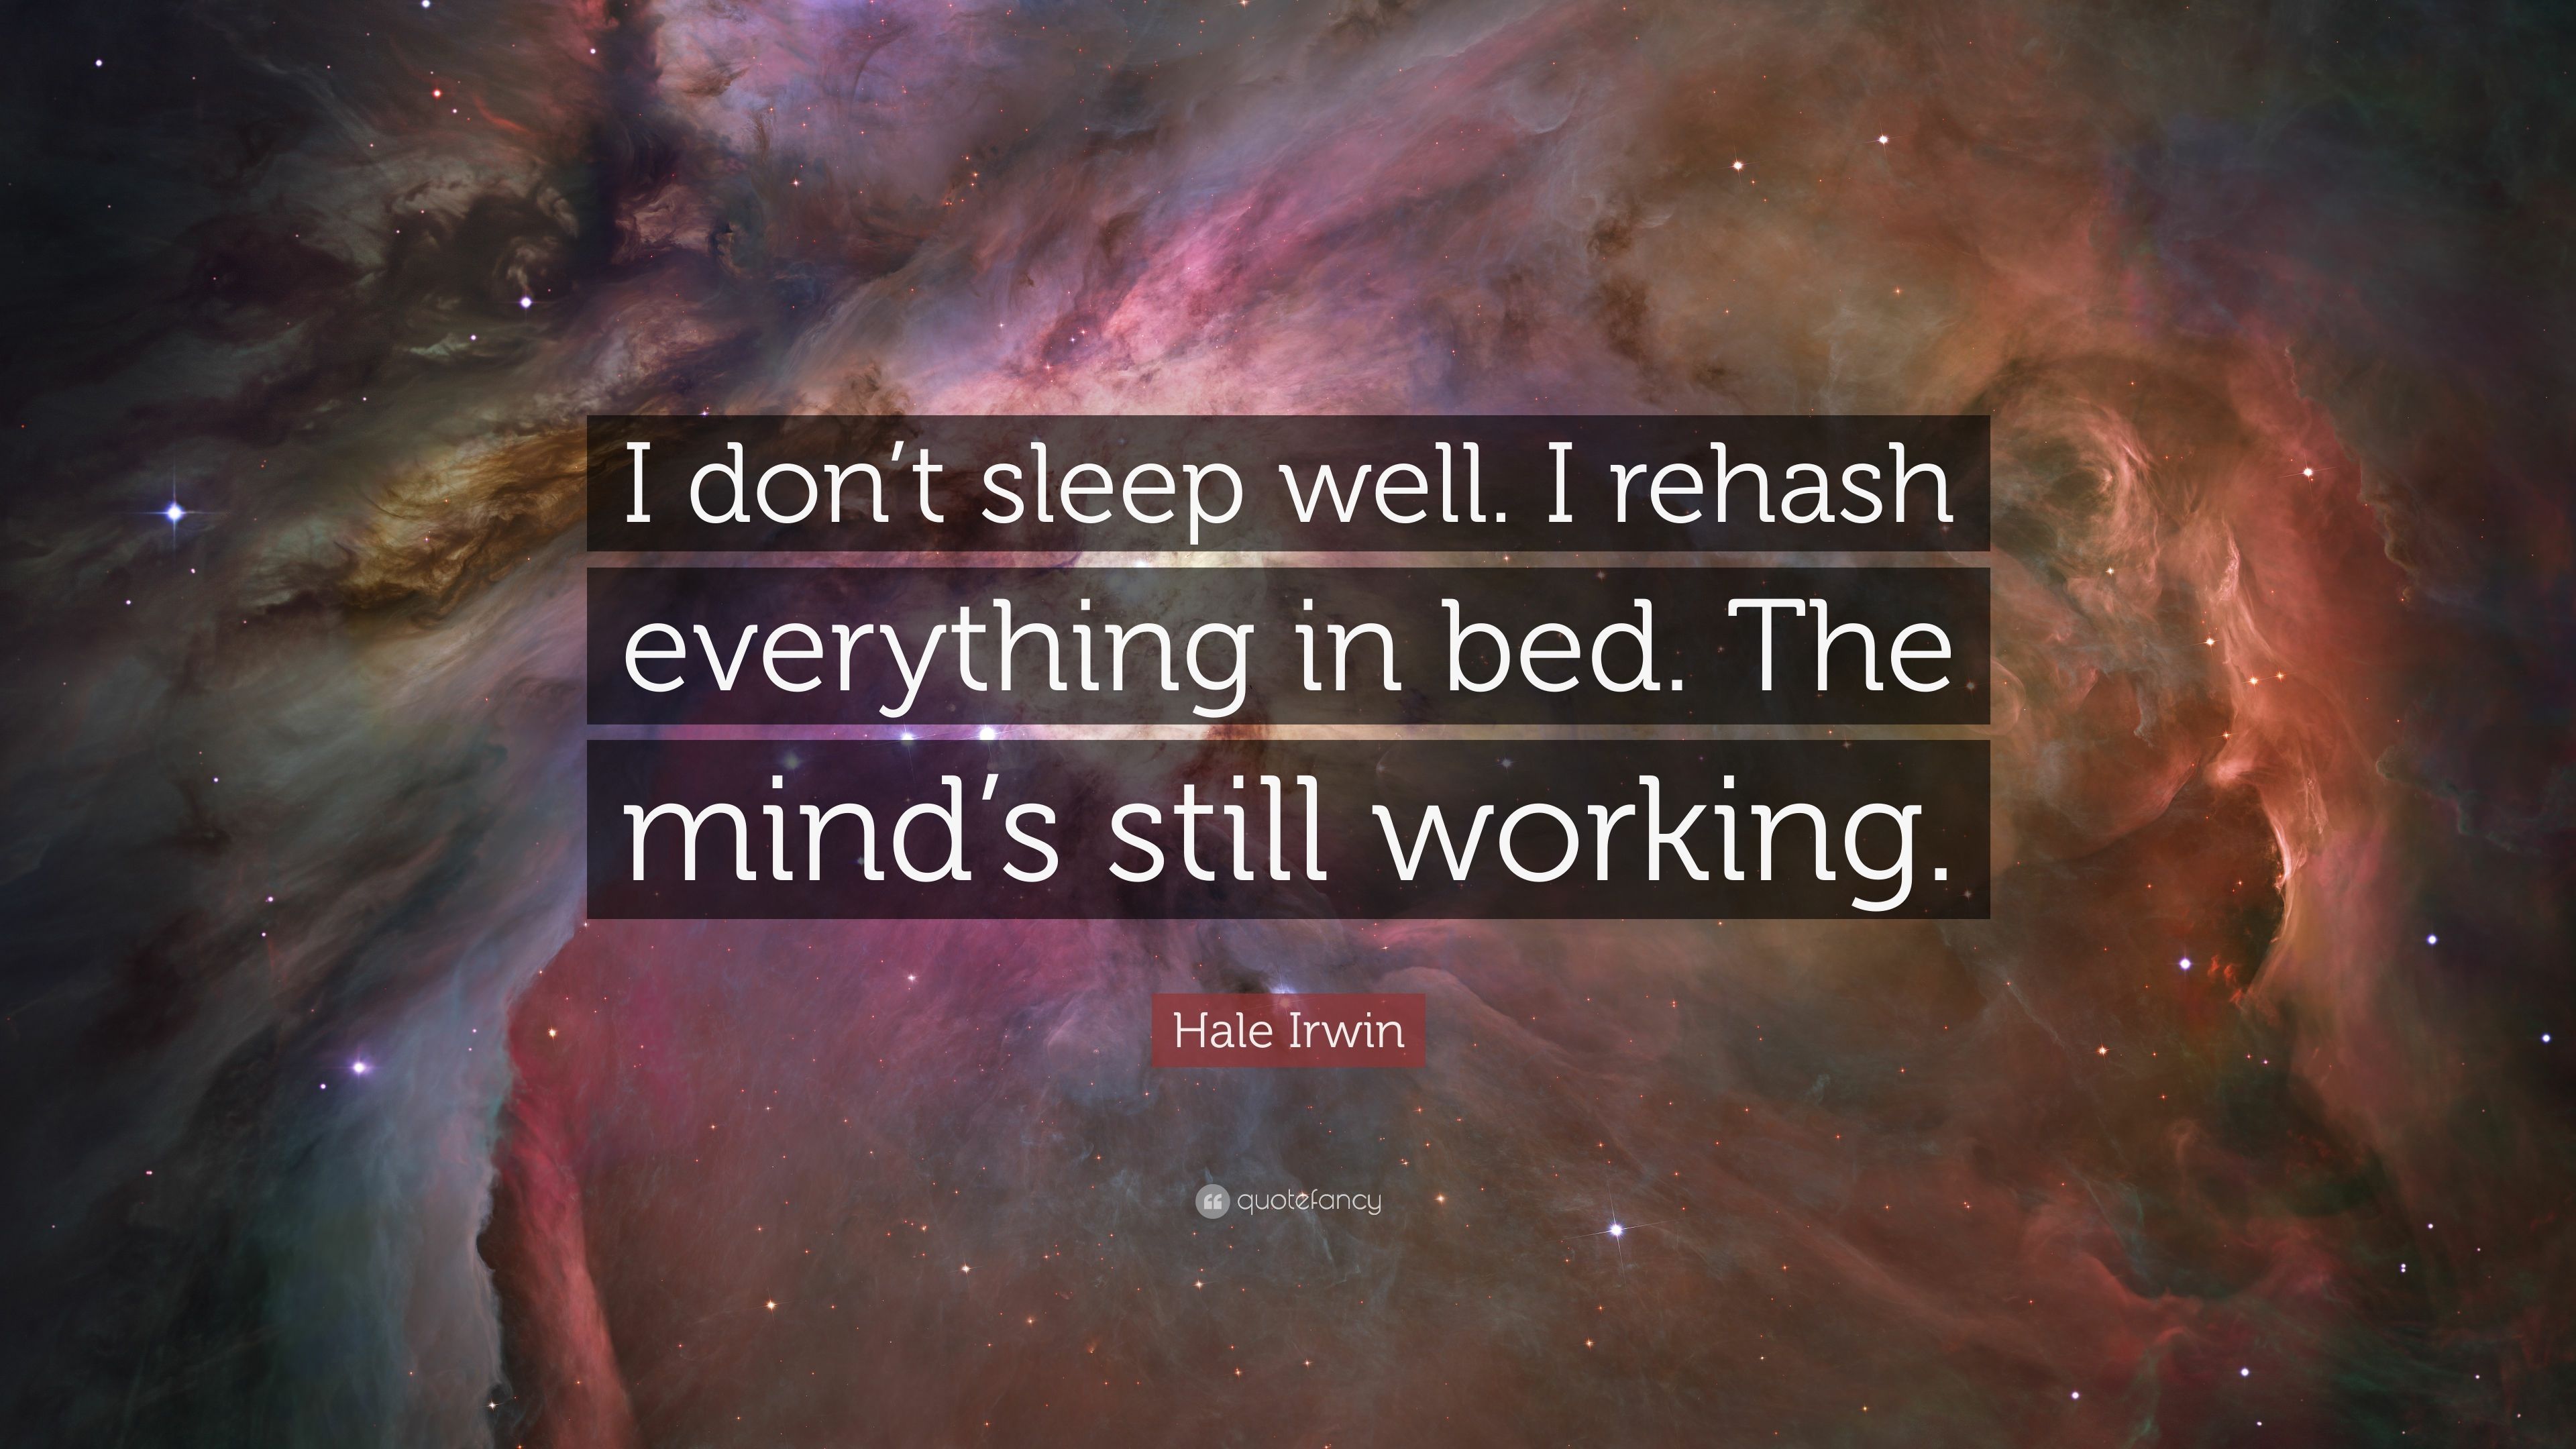 Hale Irwin Quote: “I don't sleep well. I rehash everything in bed. The mind's still working.” (7 wallpaper)